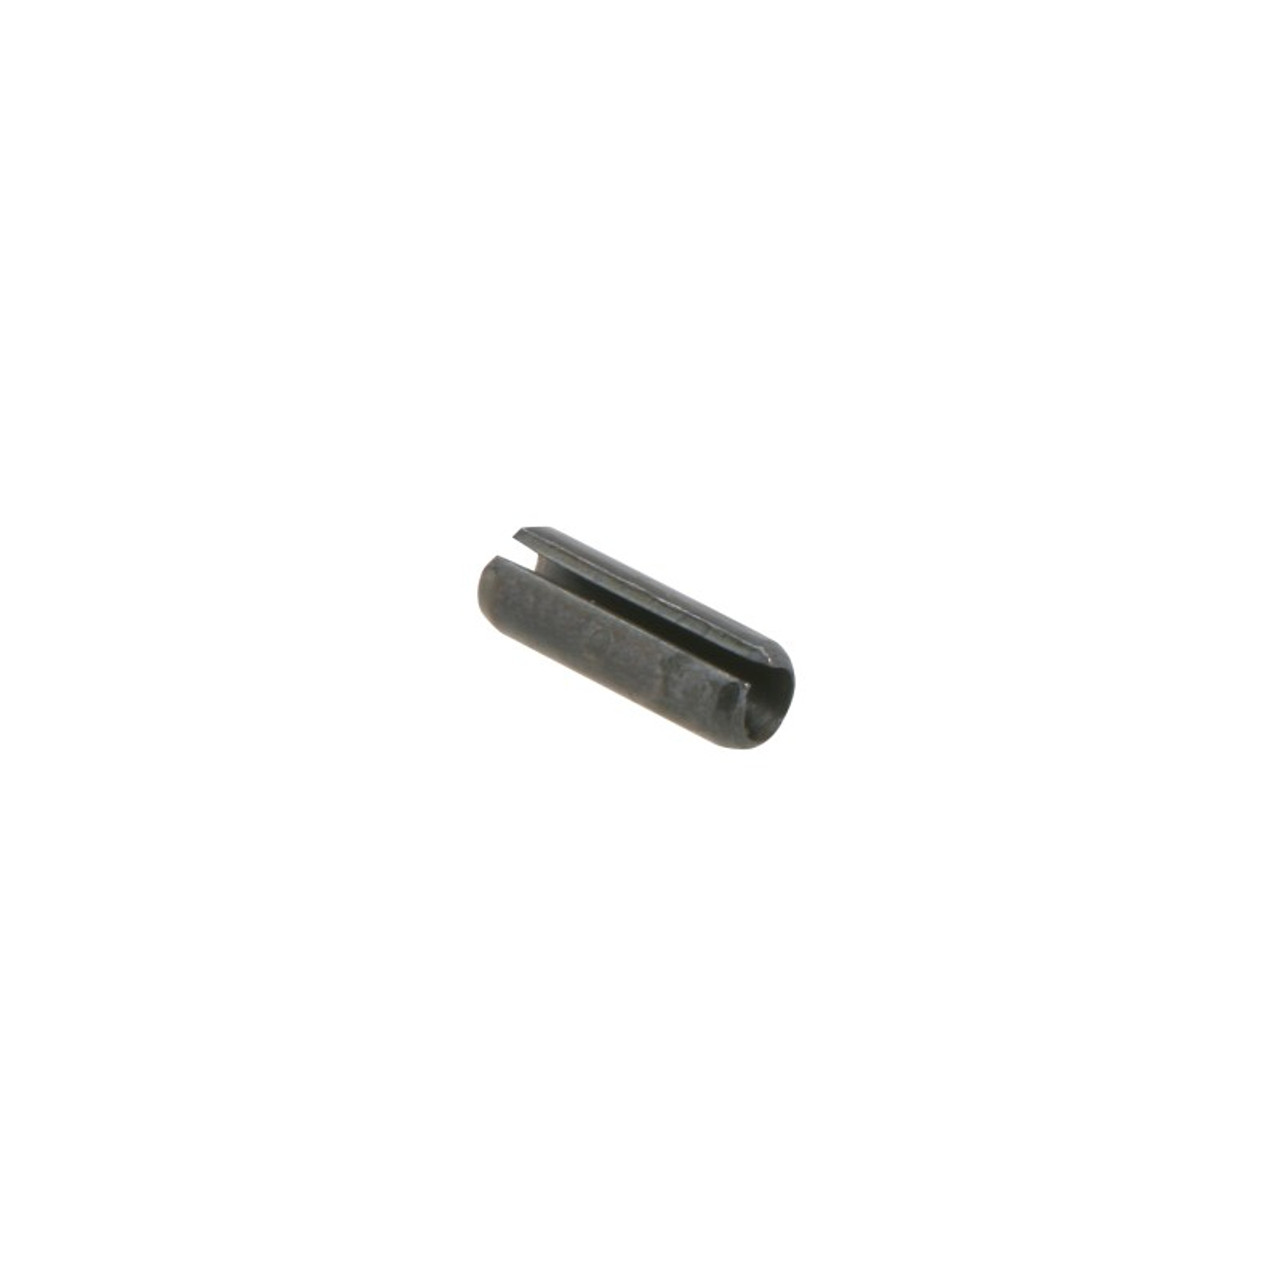 Product: Spartan Tool Universal Pin Punch - 44054900